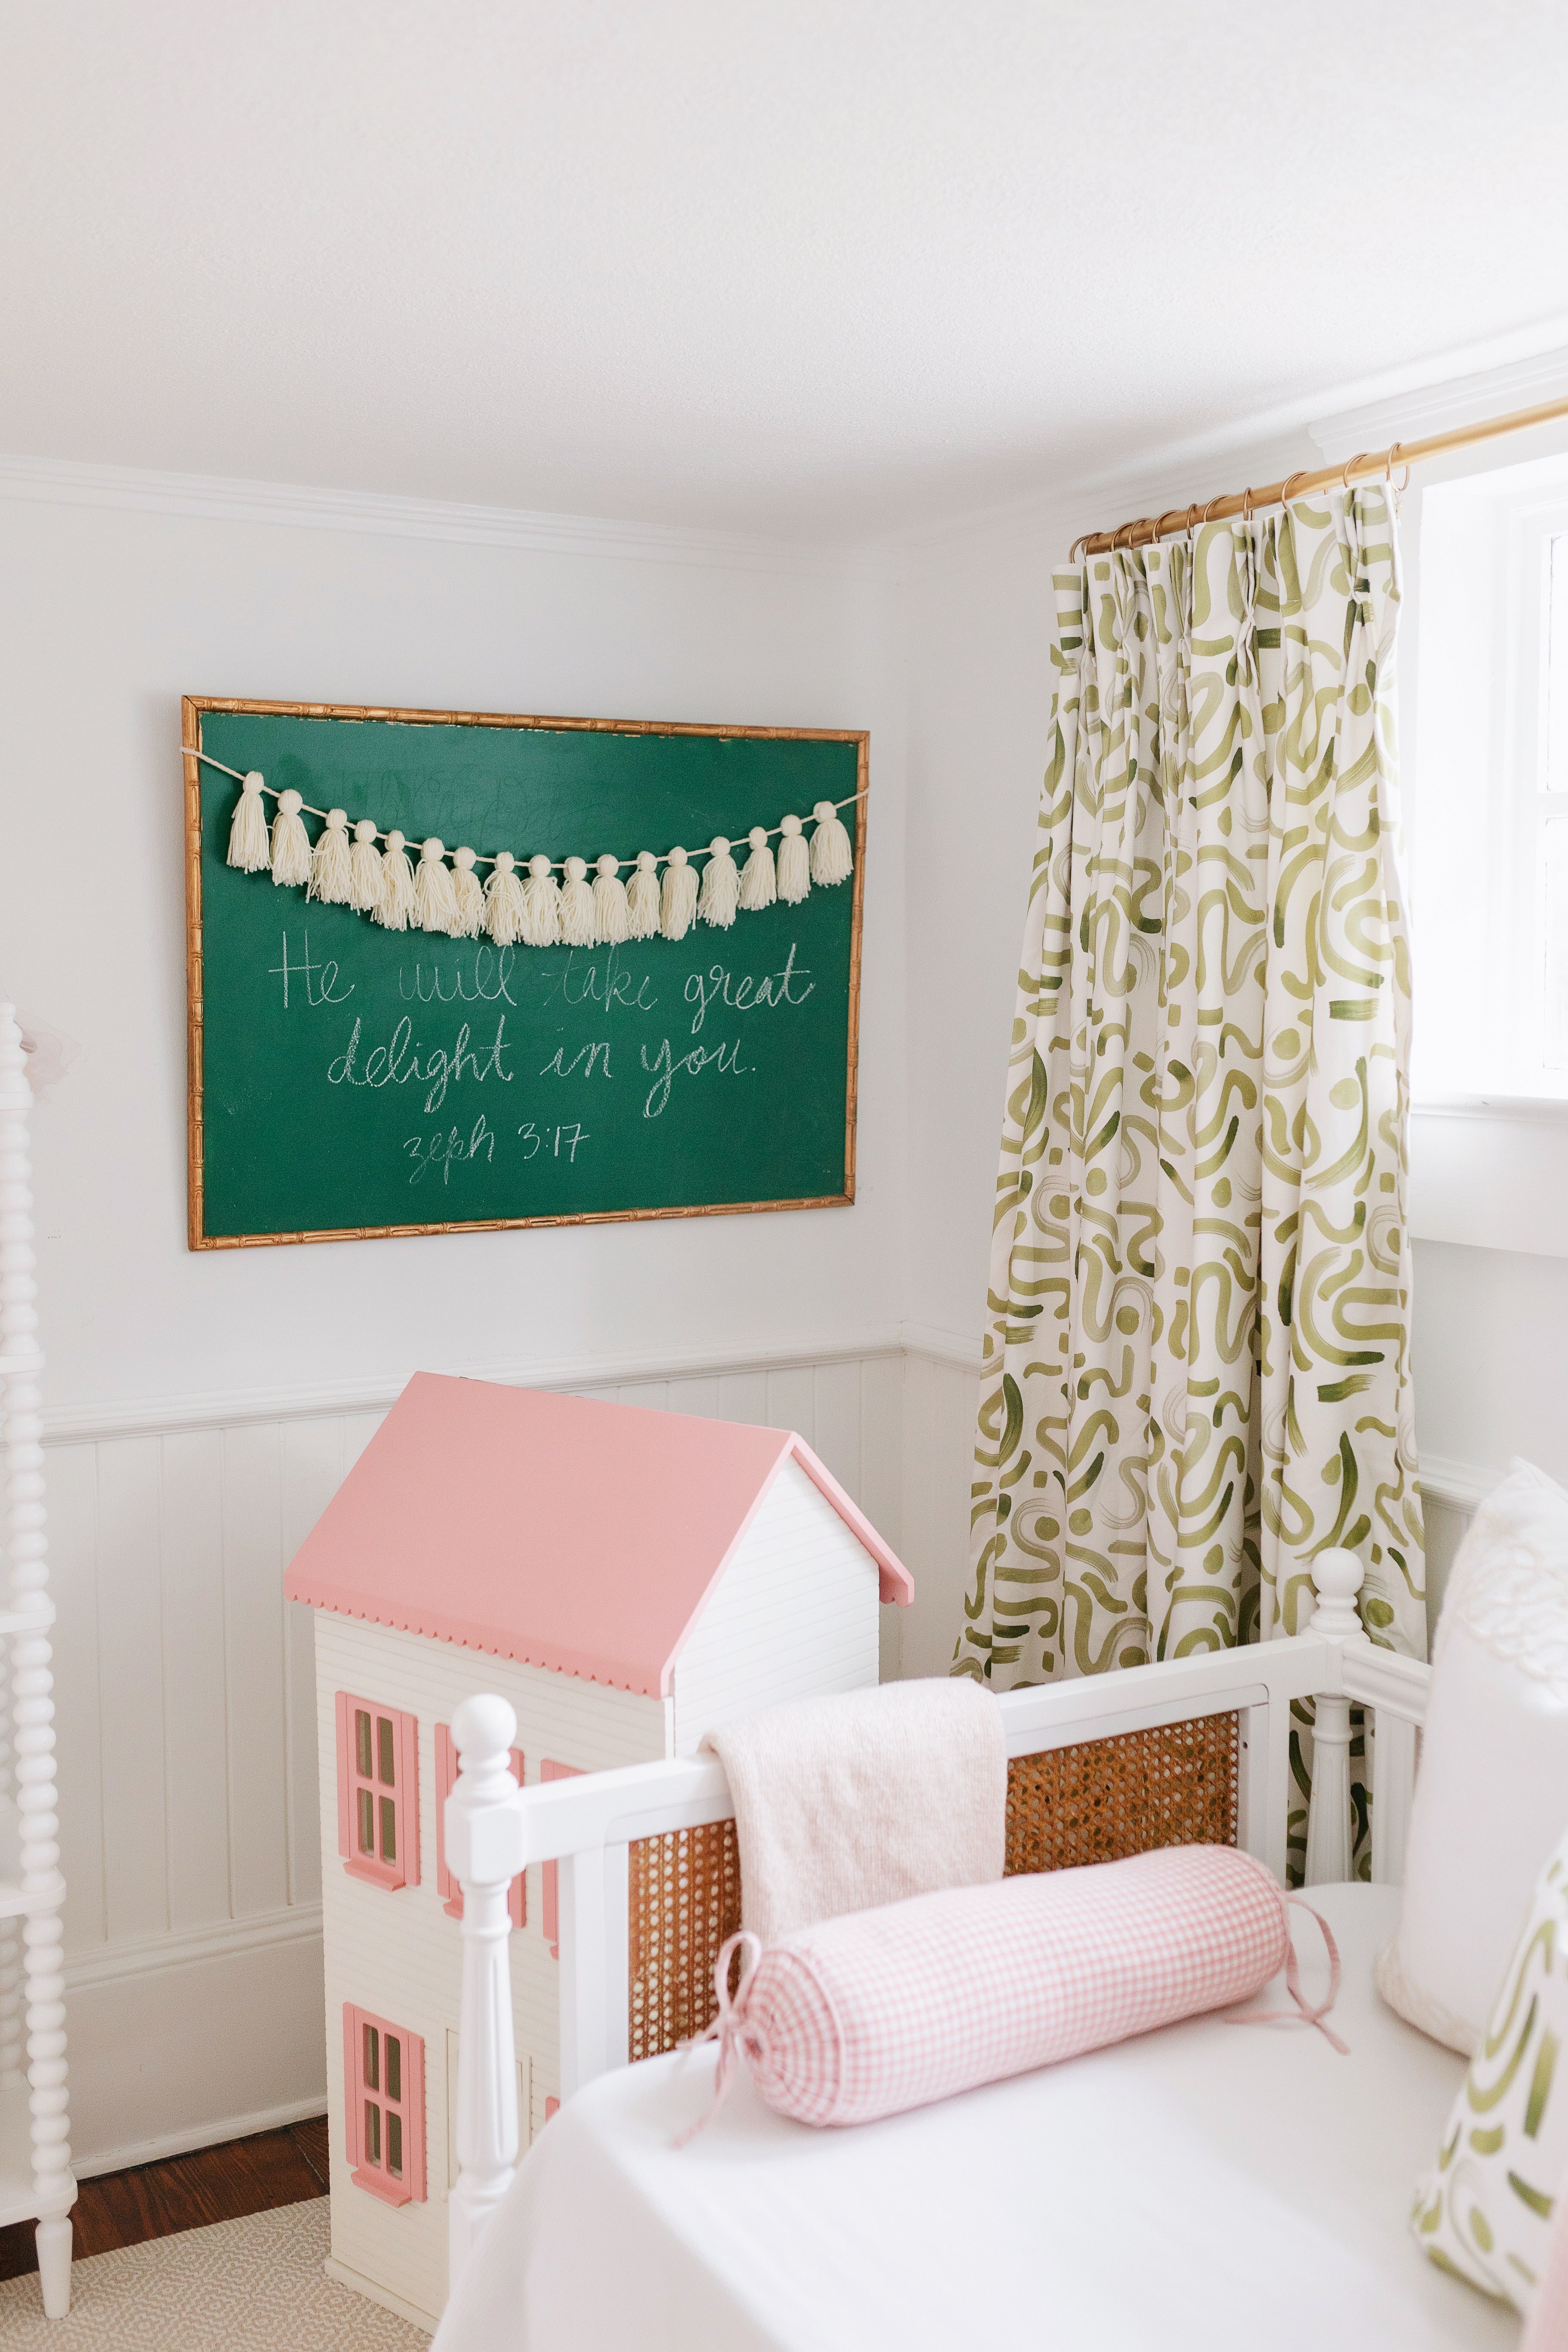 Moss abstract curtain panel hanging on a window behind a white daybed next to a green chalkboard